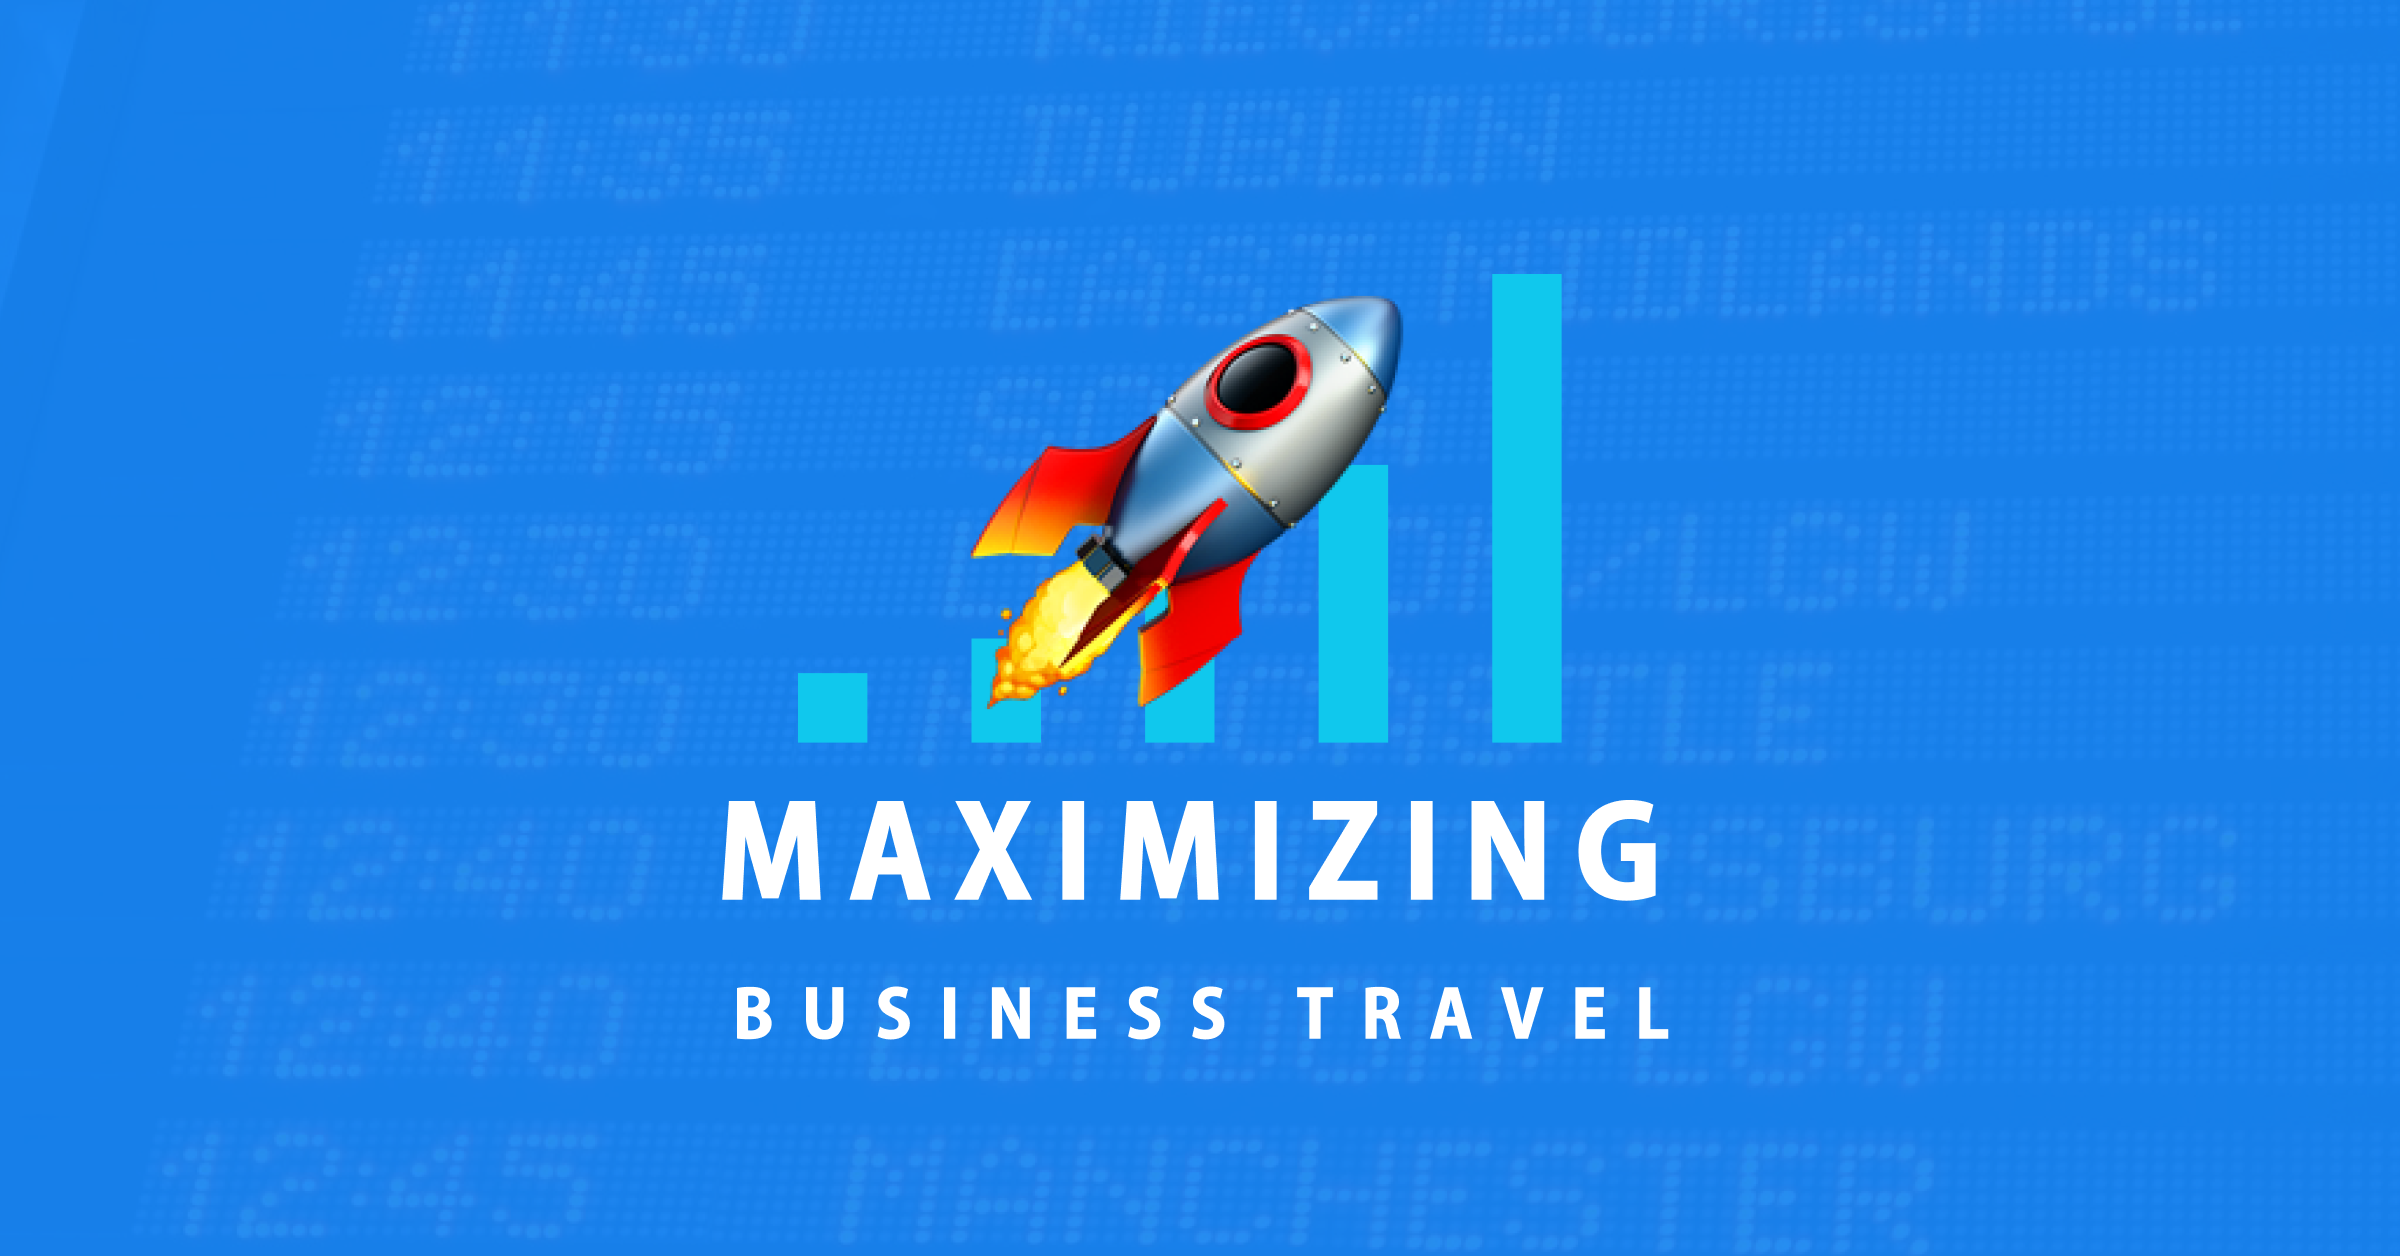 6 Key Components To Maximize Your Business Trip Itinerary